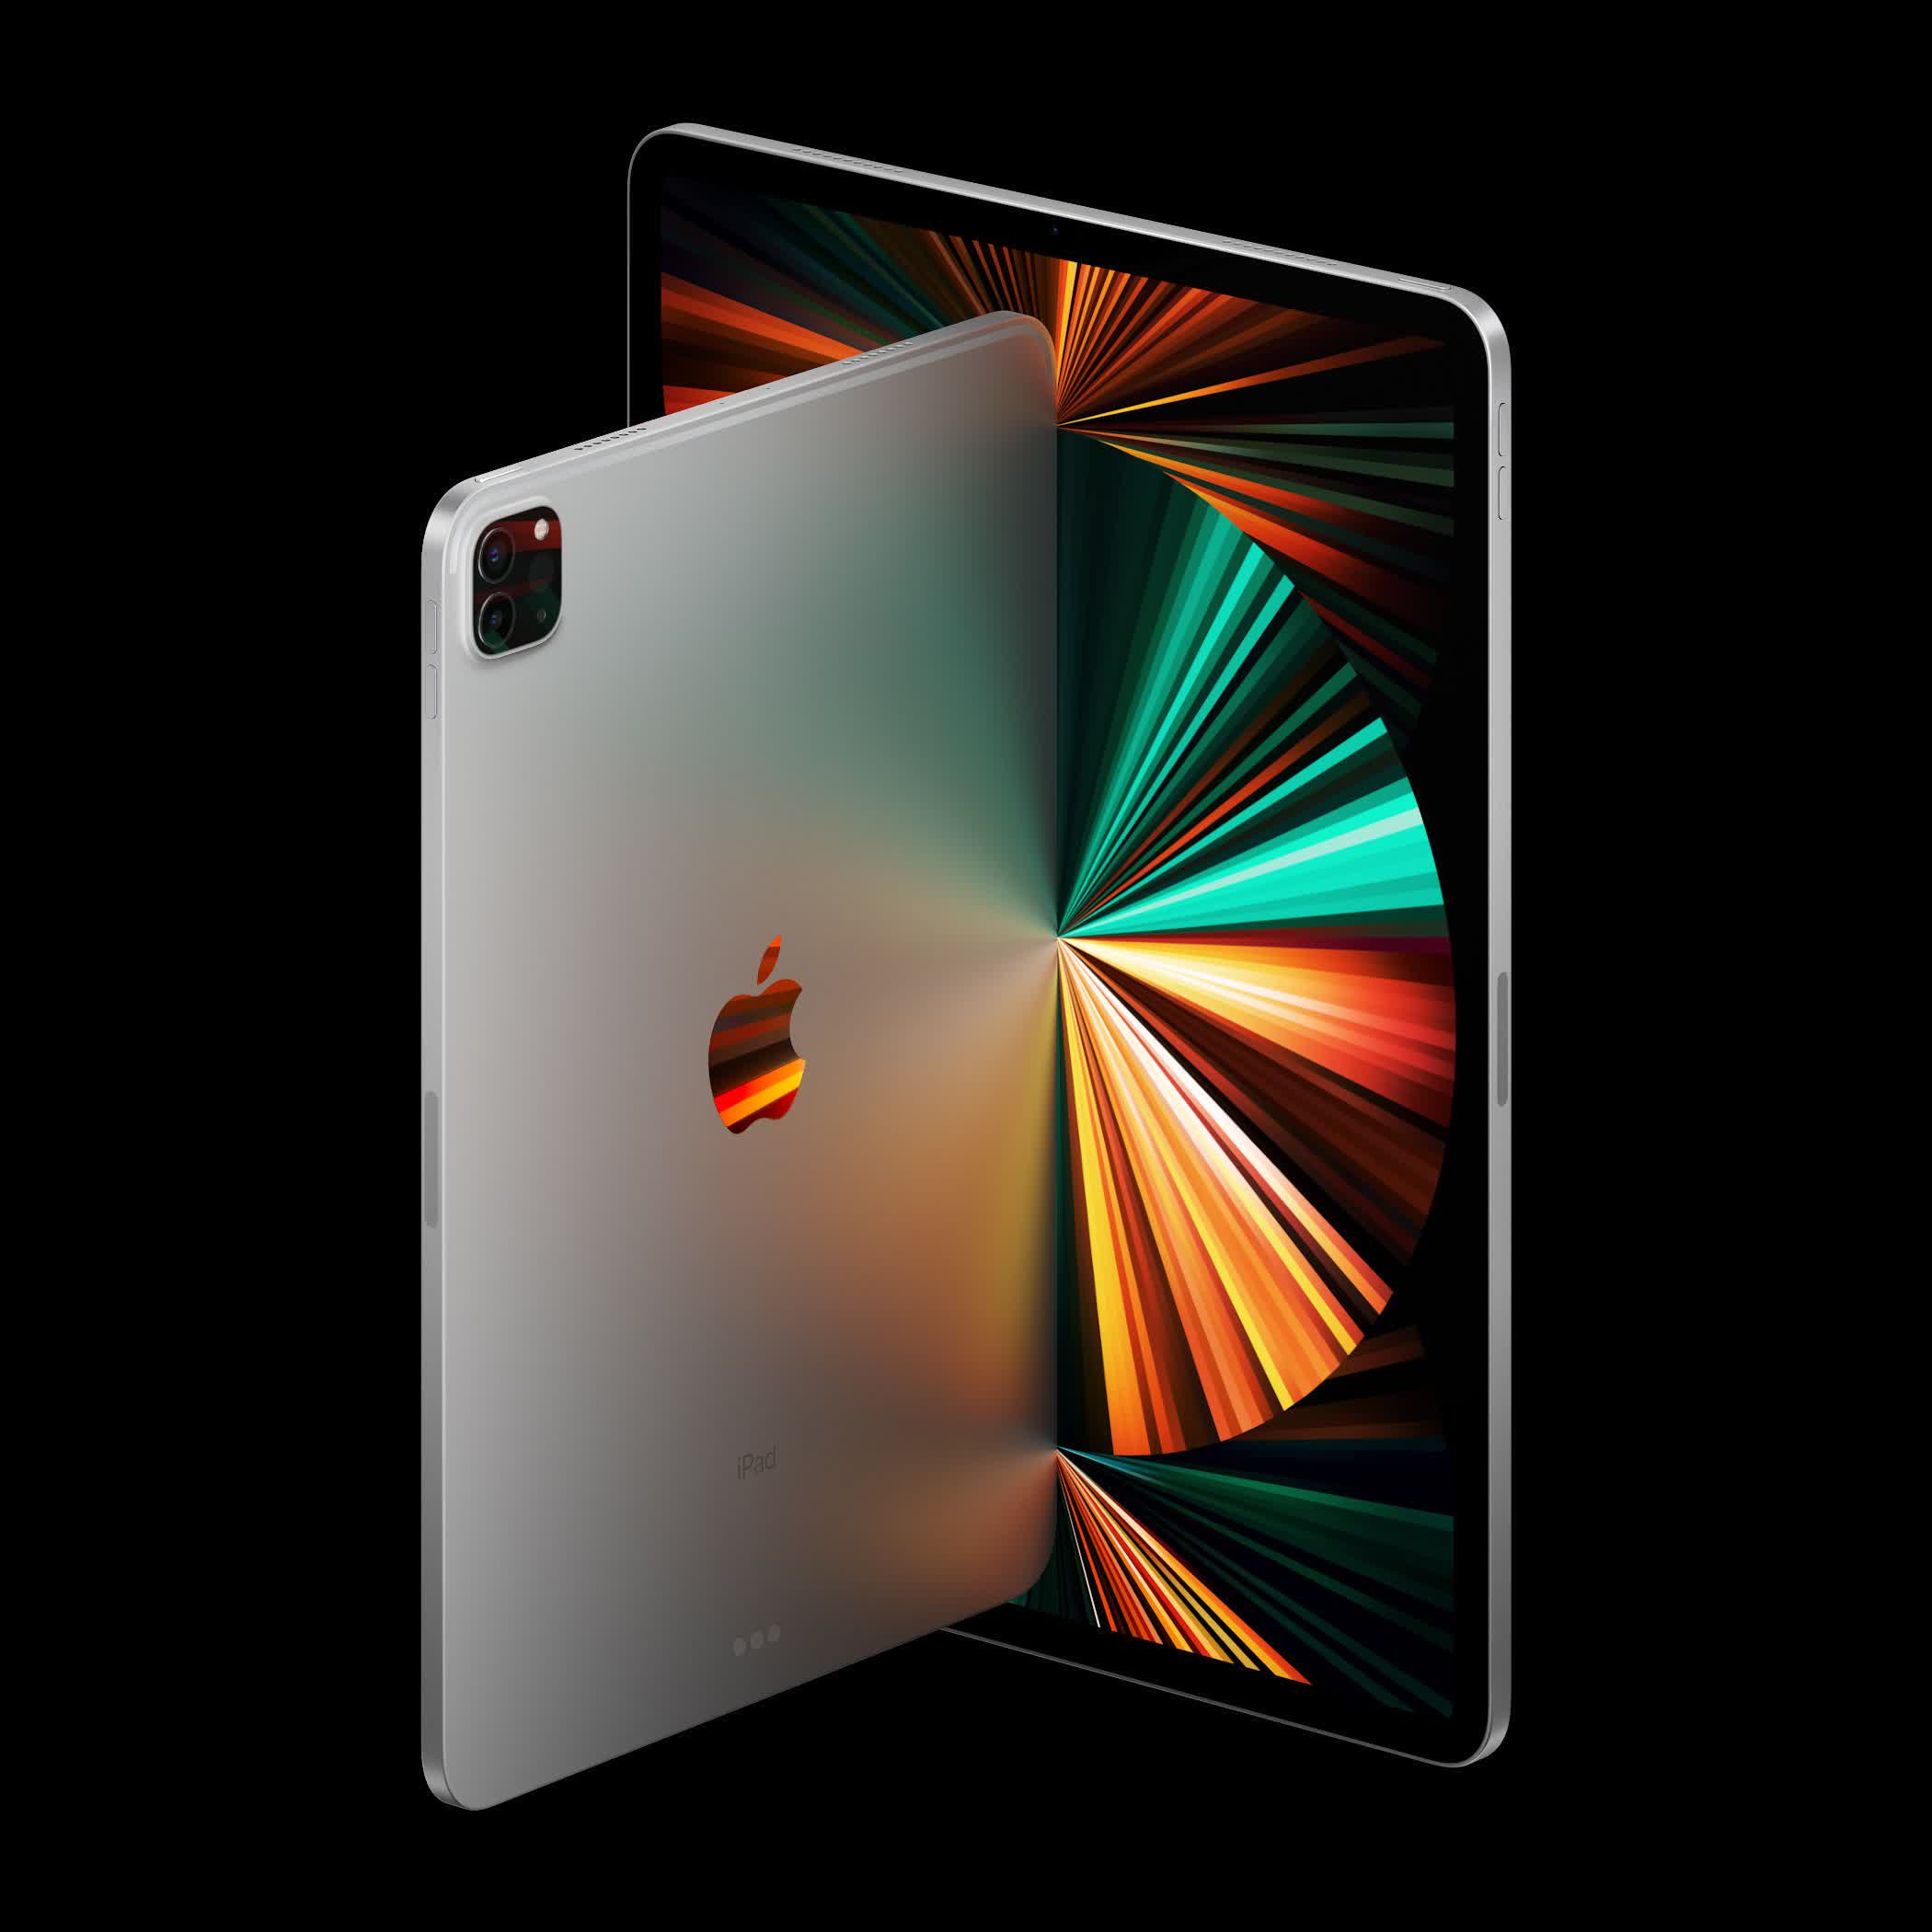 Upcoming iPad Pro could arrive with more glass, wireless and MagSafe charging